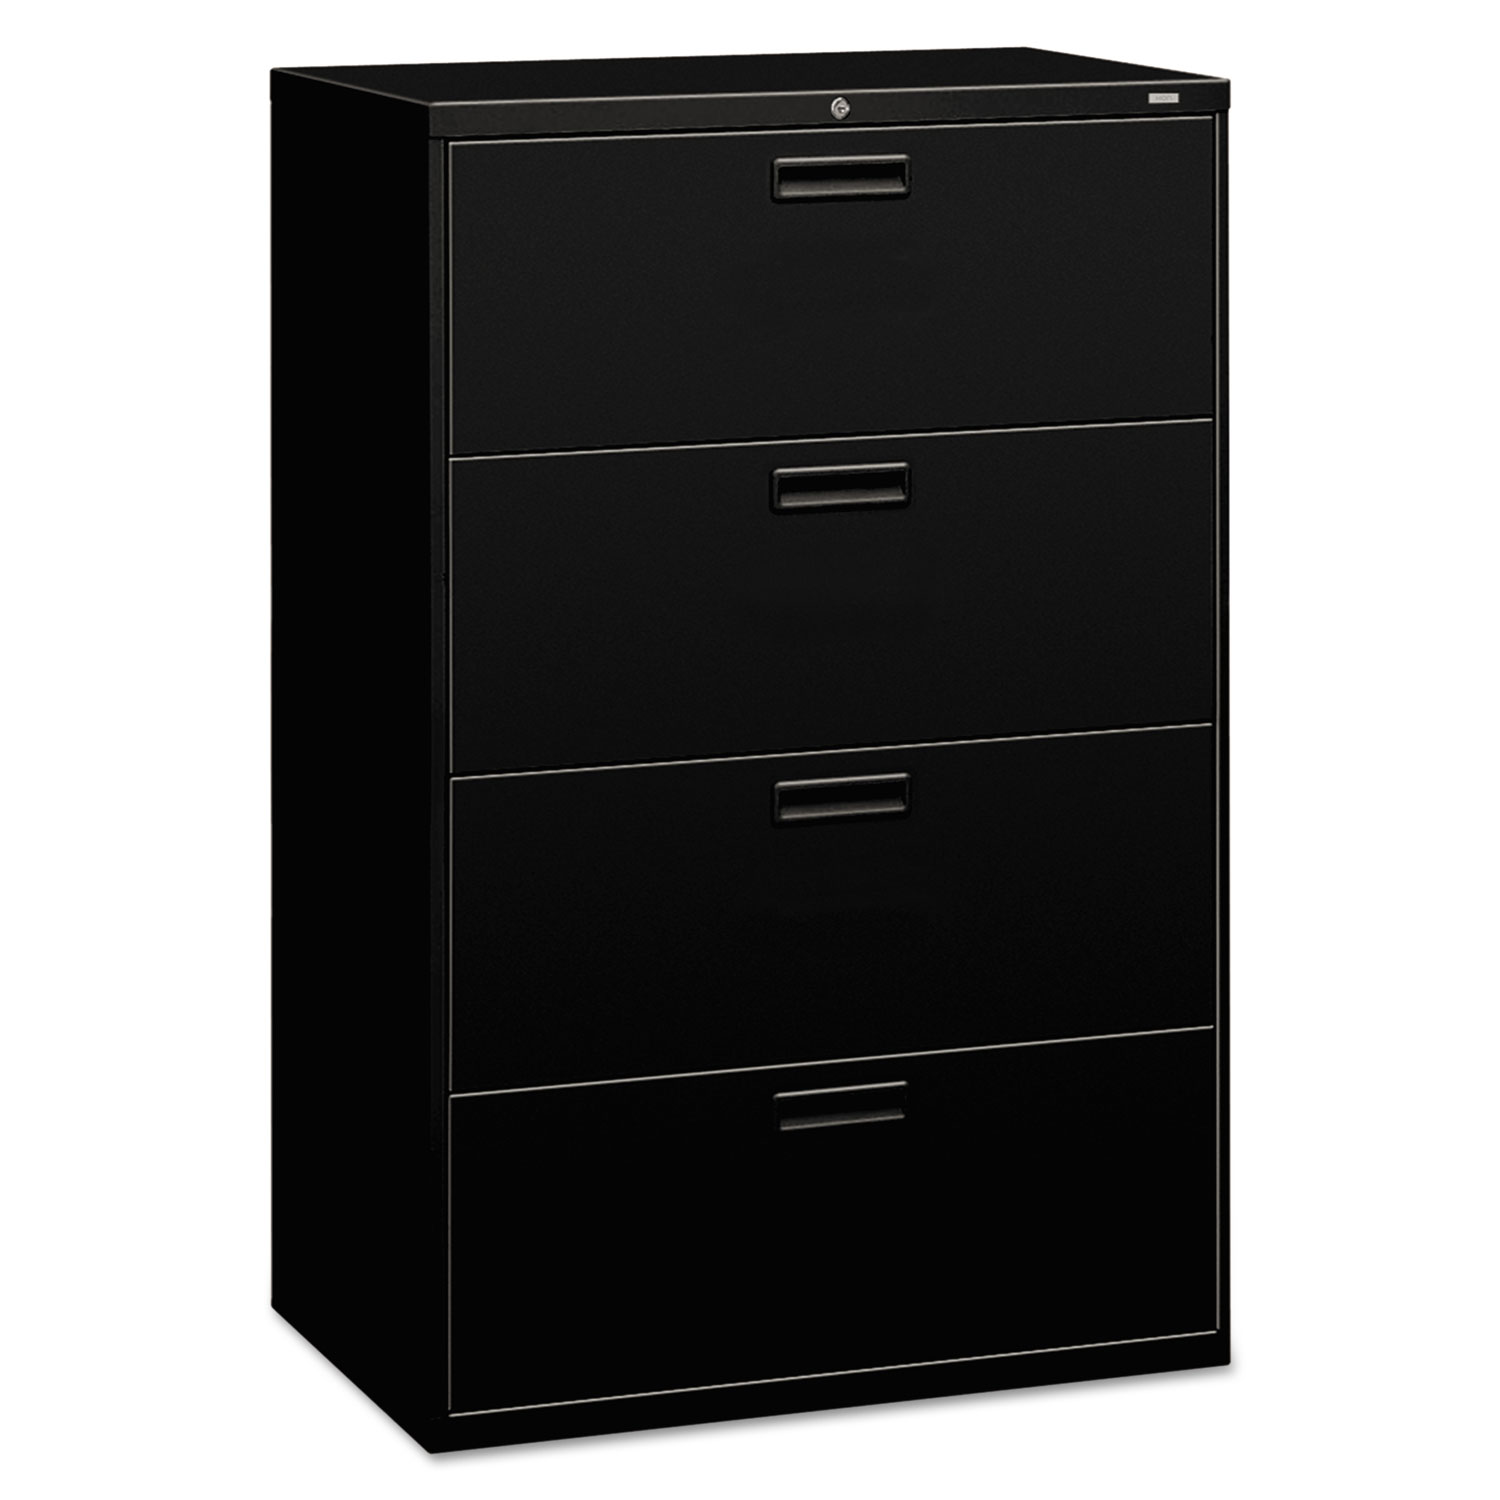 500 Series Four-Drawer Lateral File, 36w x 18d x 52-1/2h, Black